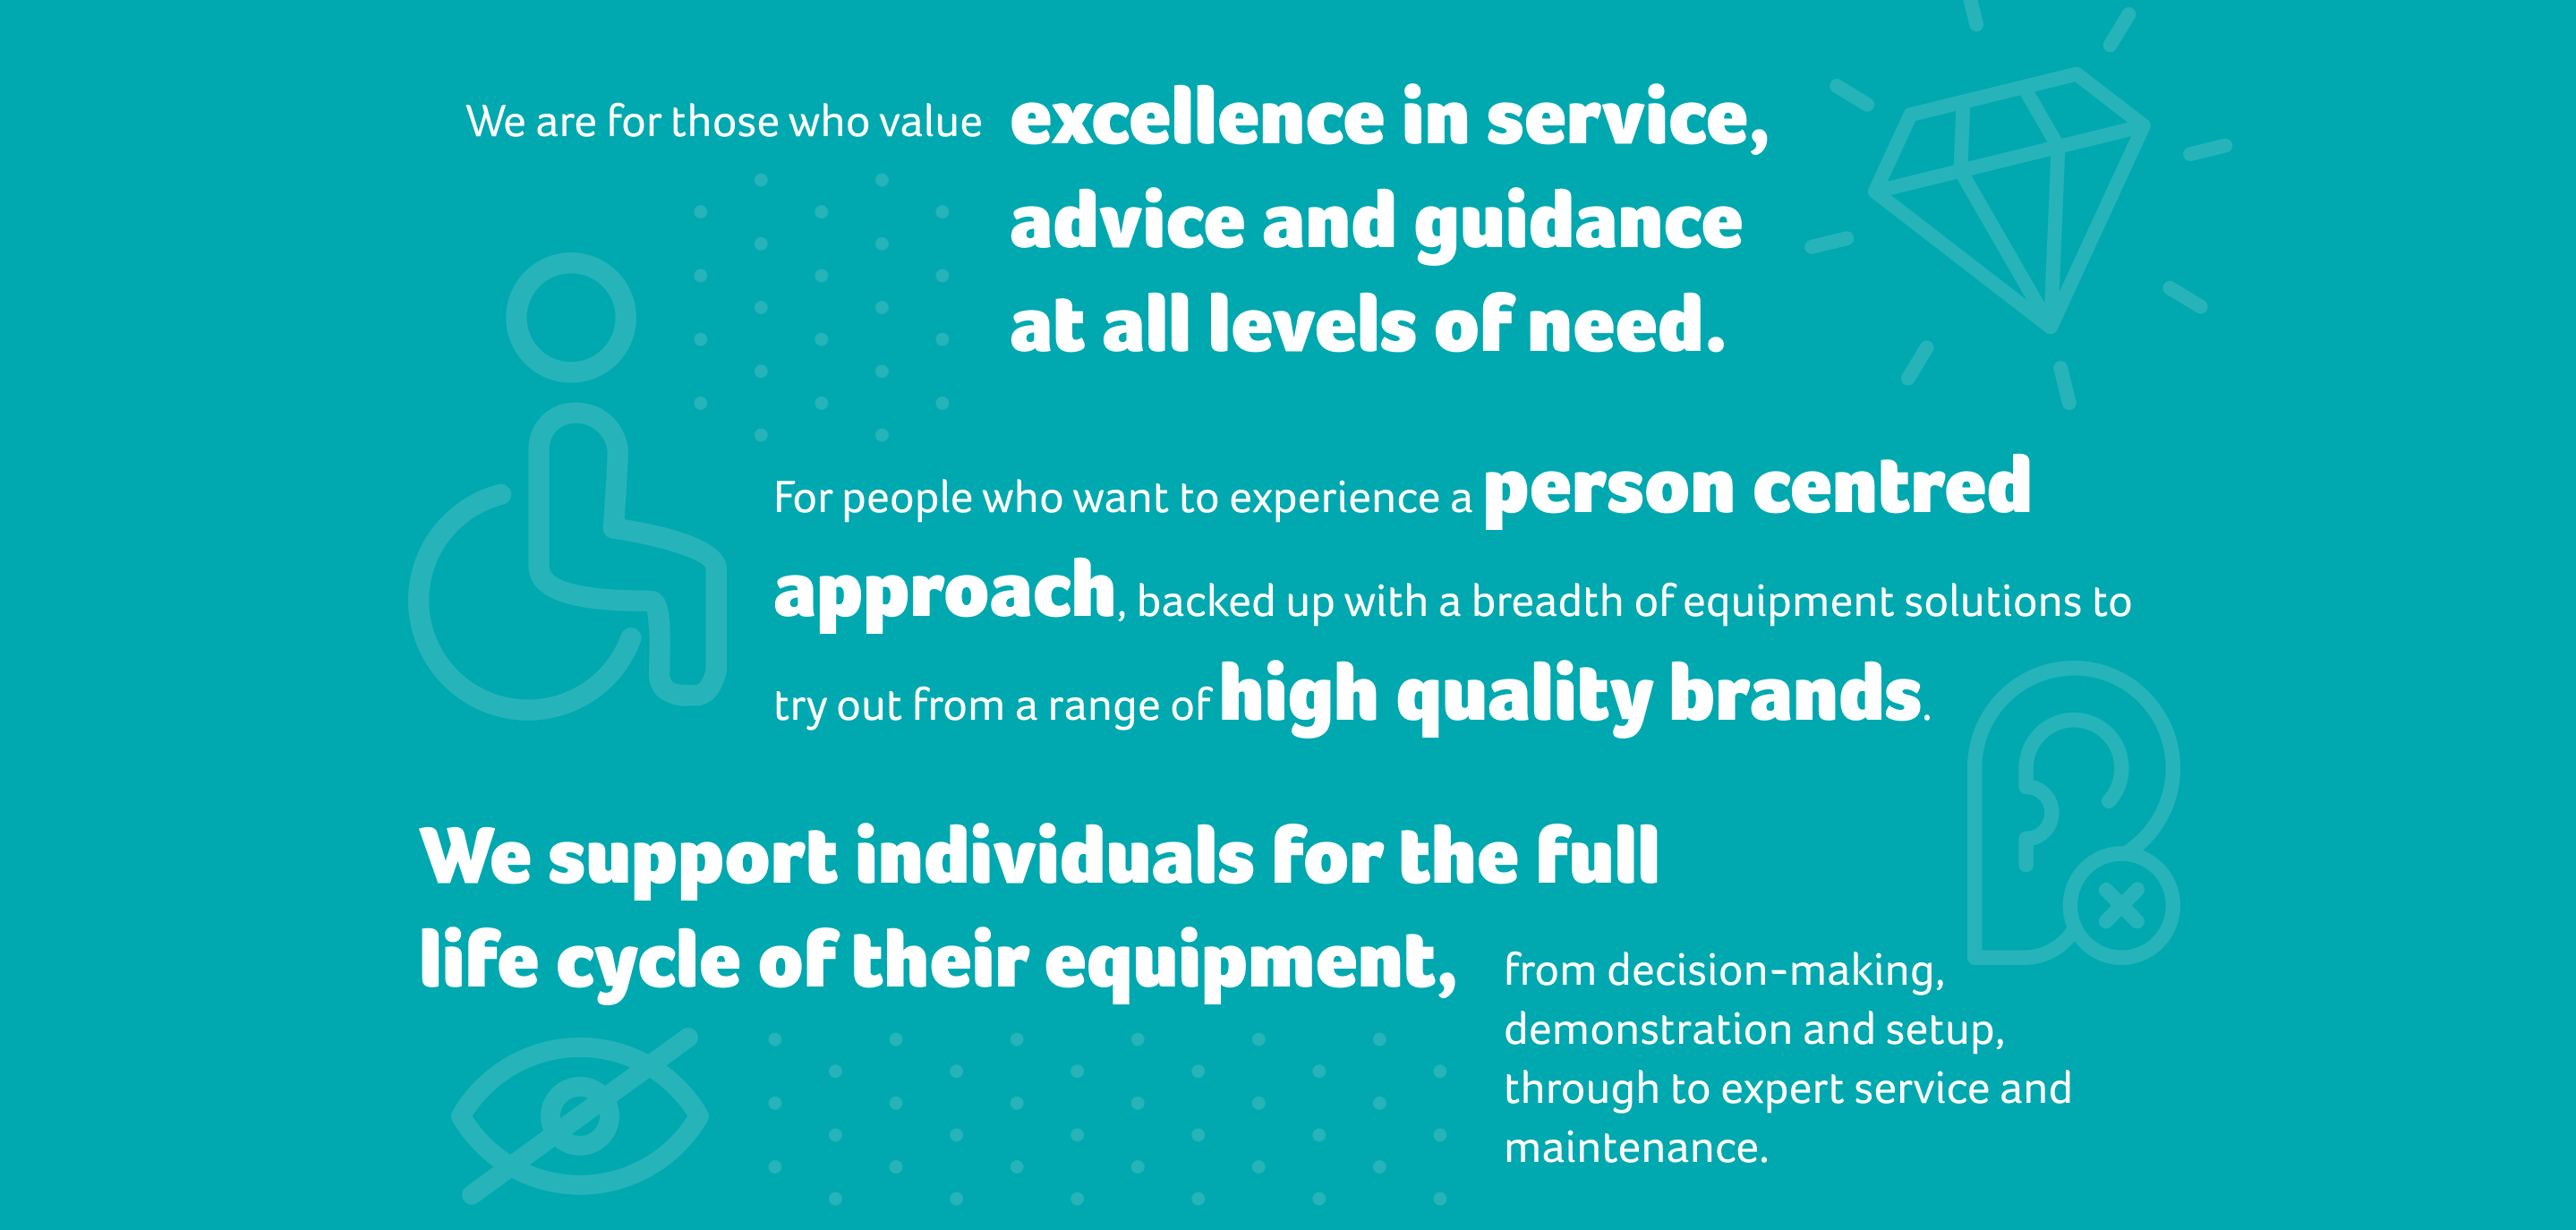 We are for those who value excellence in service,  advice and guidance at all levels of need. For people who want to experience a person centred approach, backed up with a breadth of equipment solutions to try out from a range of high quality brands.